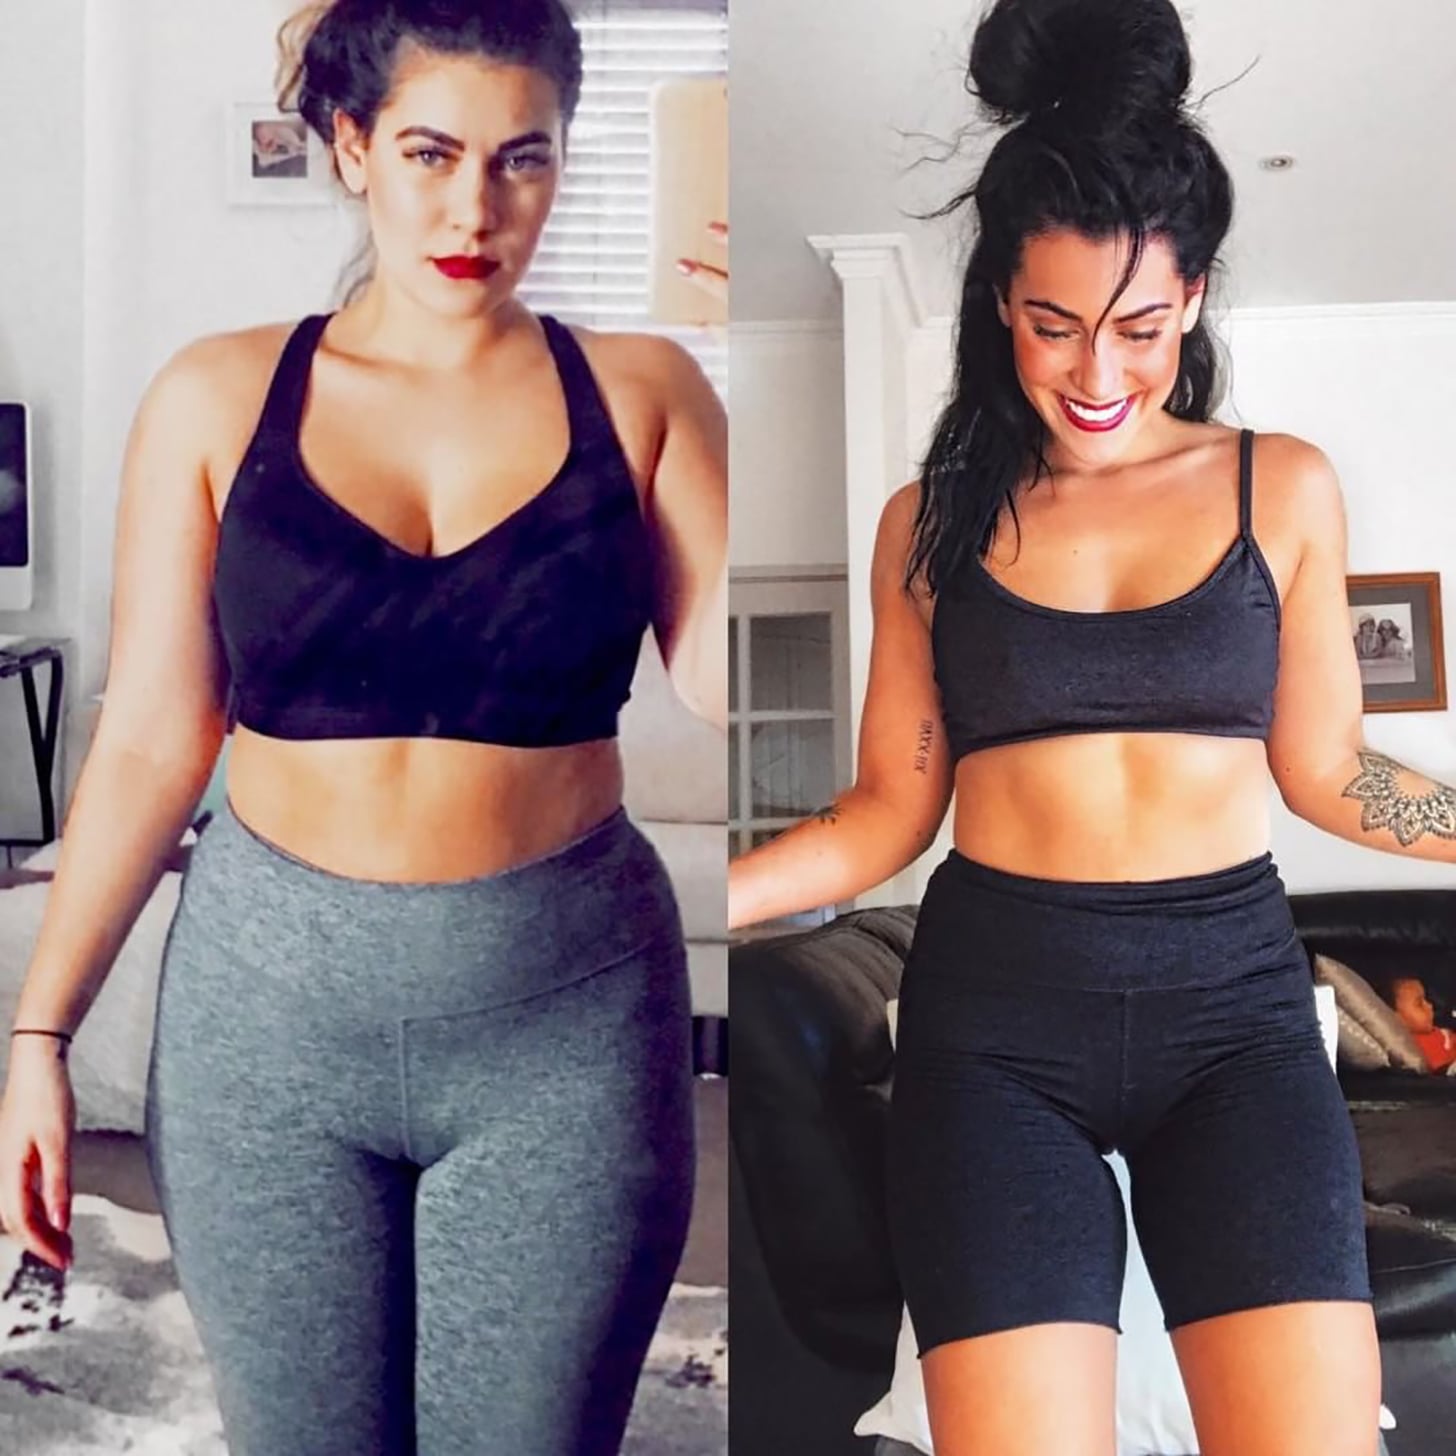 How To Lose Weight  Trainer Gains and Loses 60 POUNDS in 'Fit to